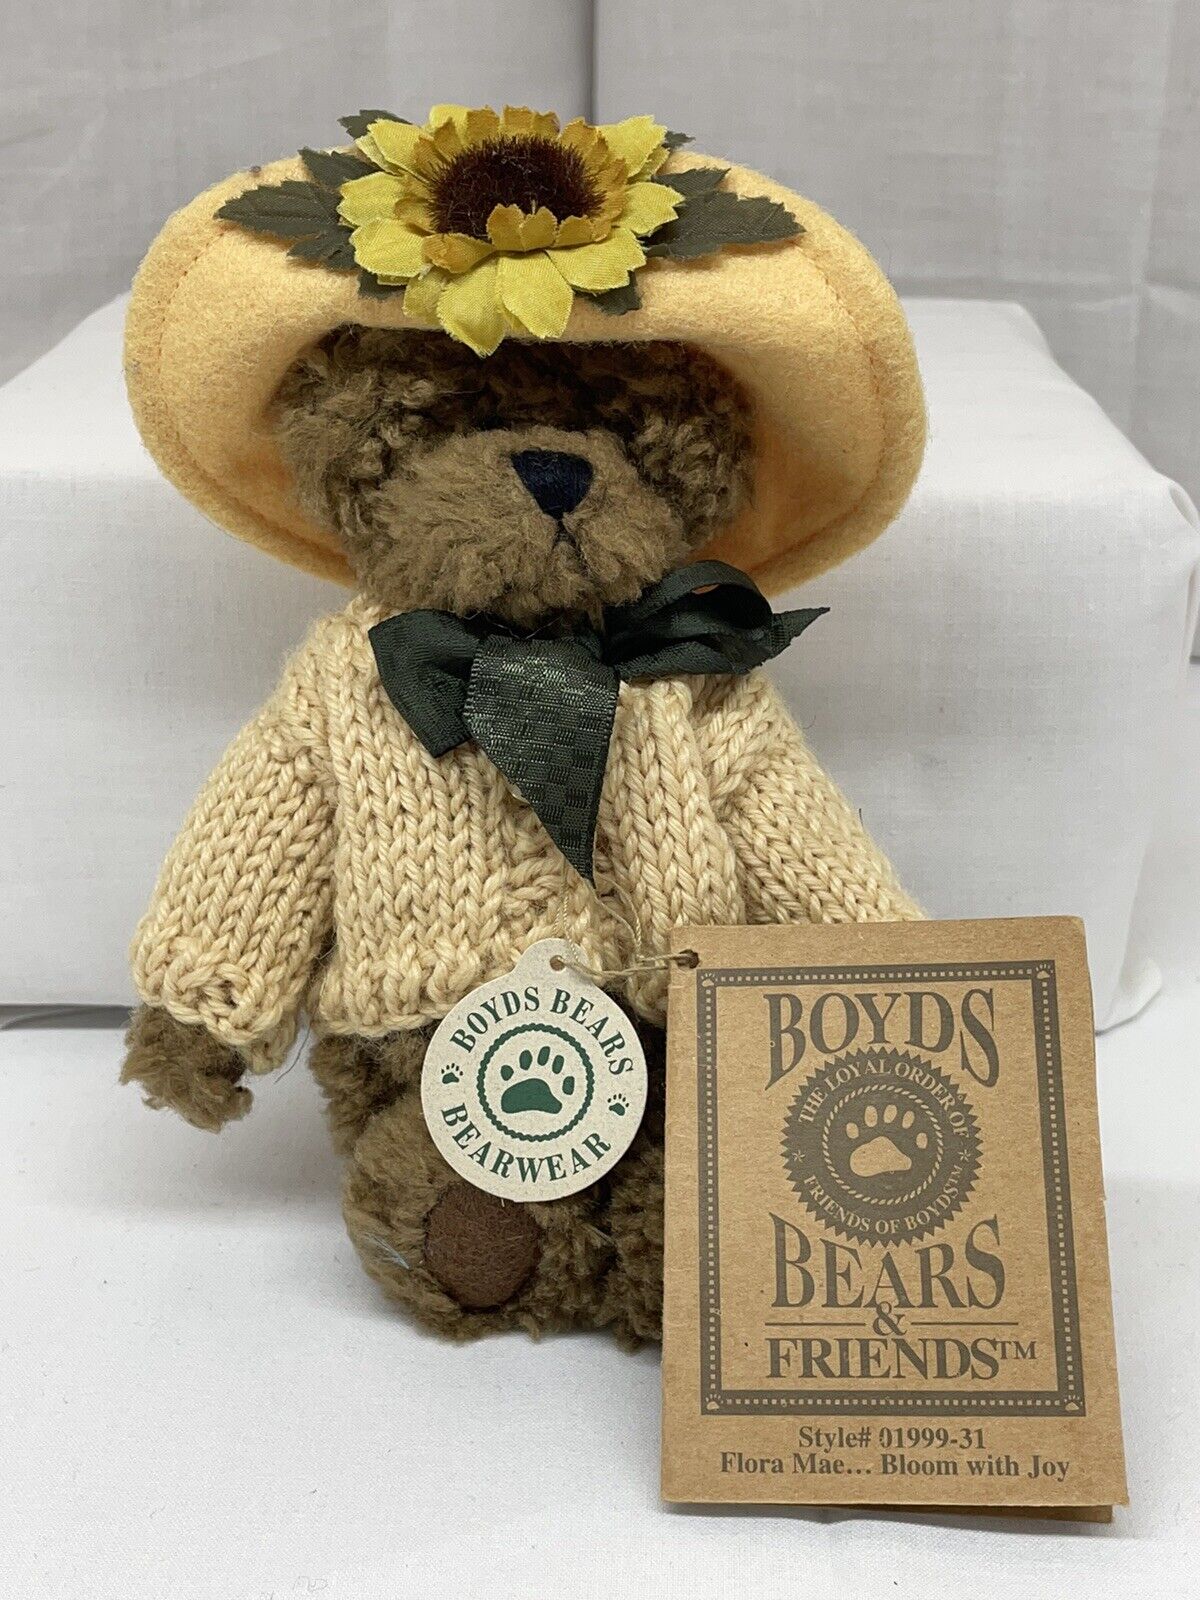 Boyds Bears And Friends Flora Mae Bloom With Joy Style #01999-31h